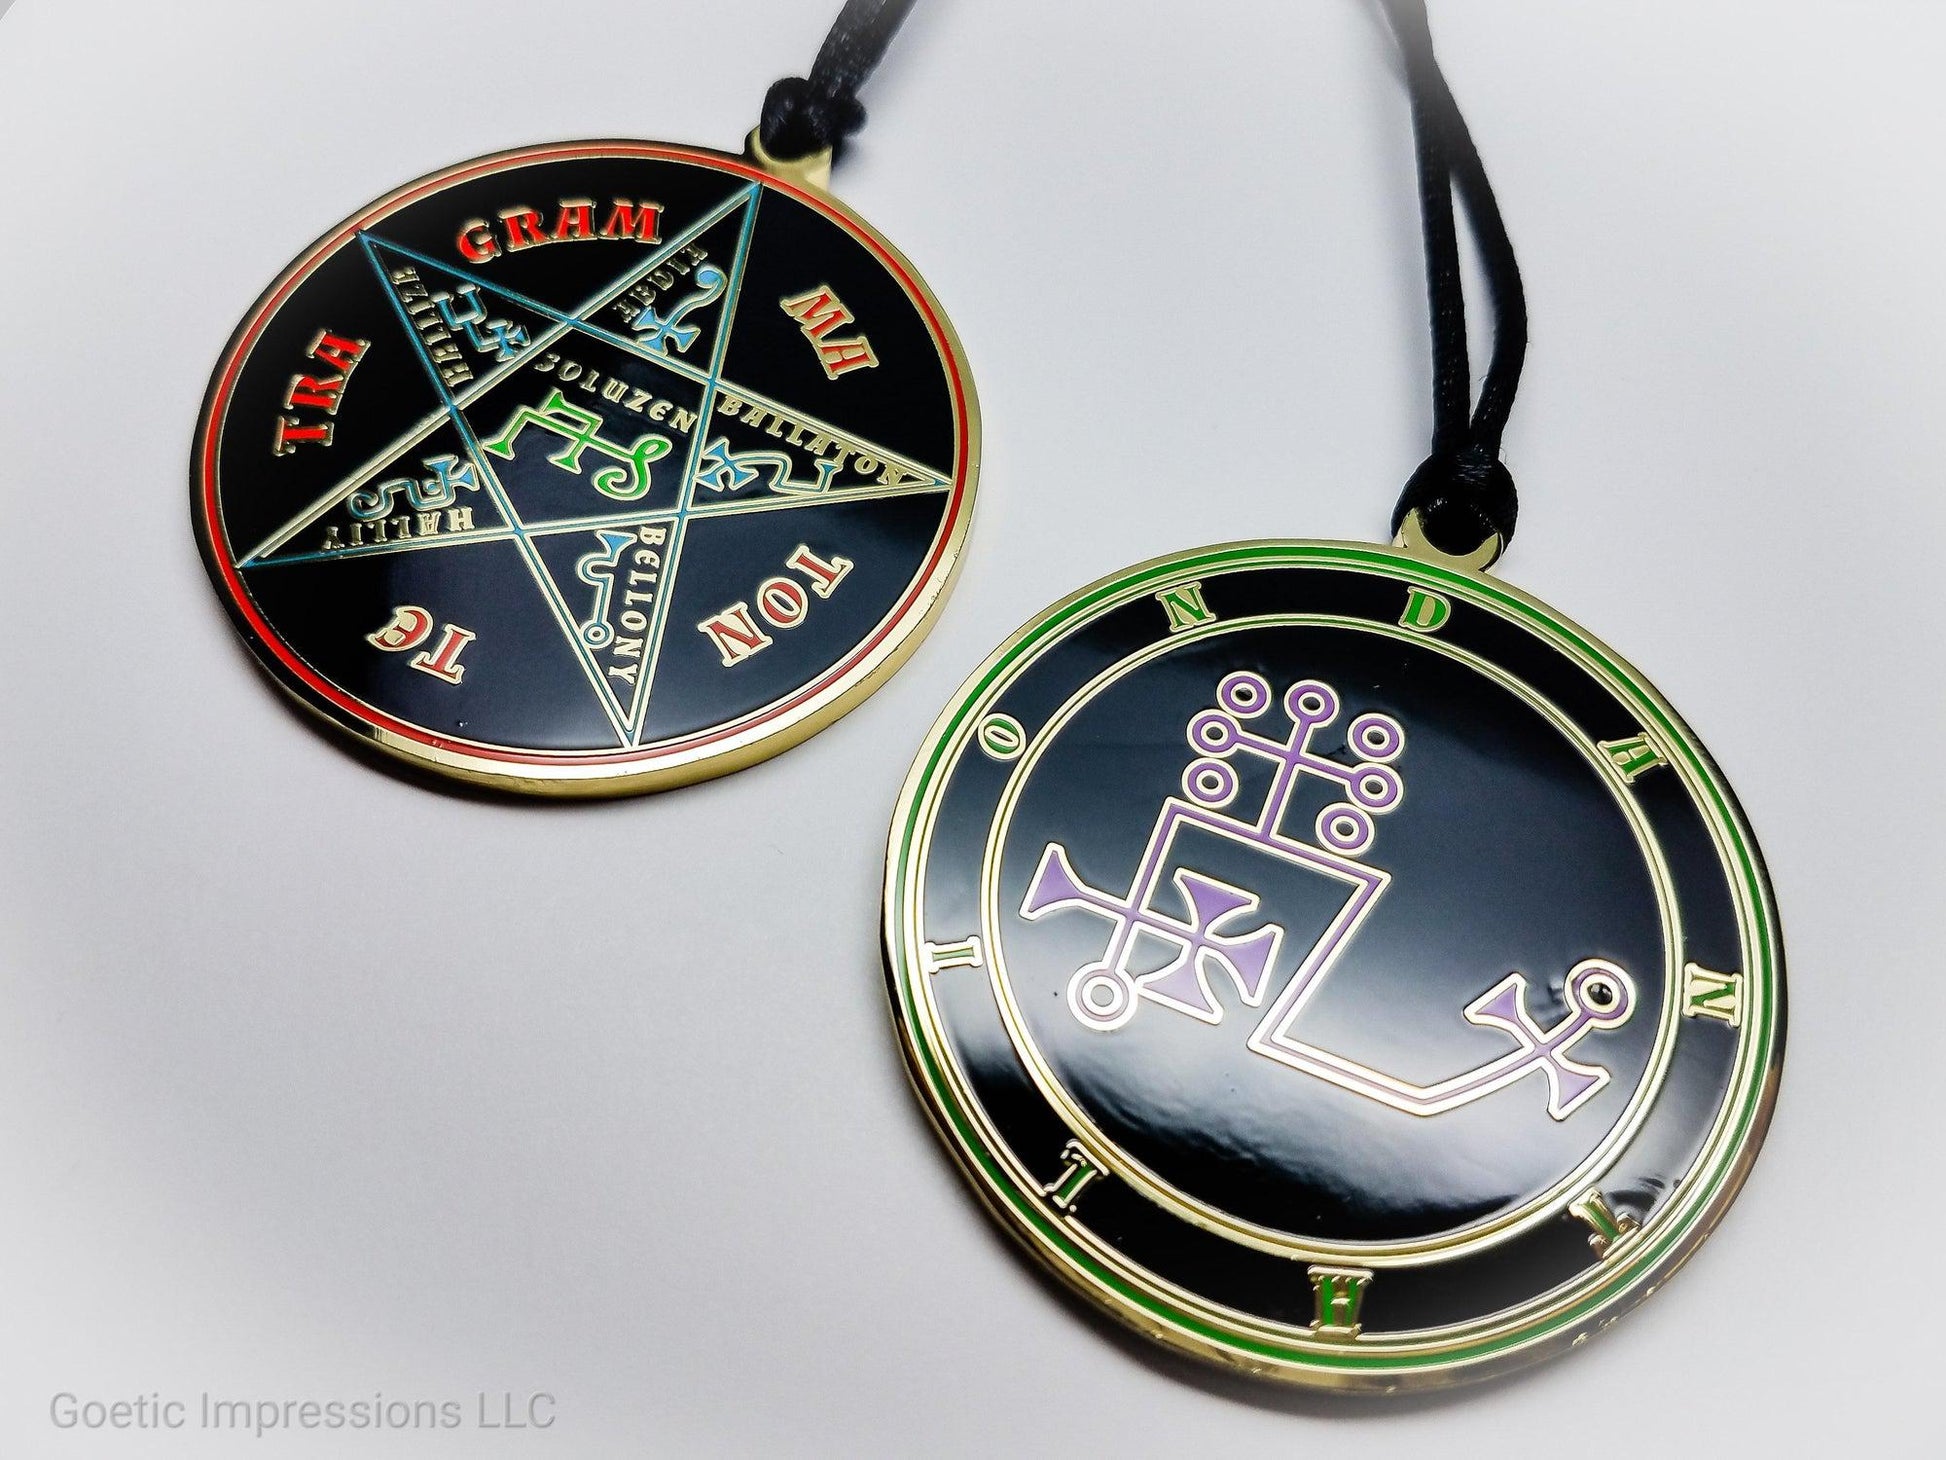 Seal of Dantalion sigil pendant with Pentacle of Solomon on reverse side